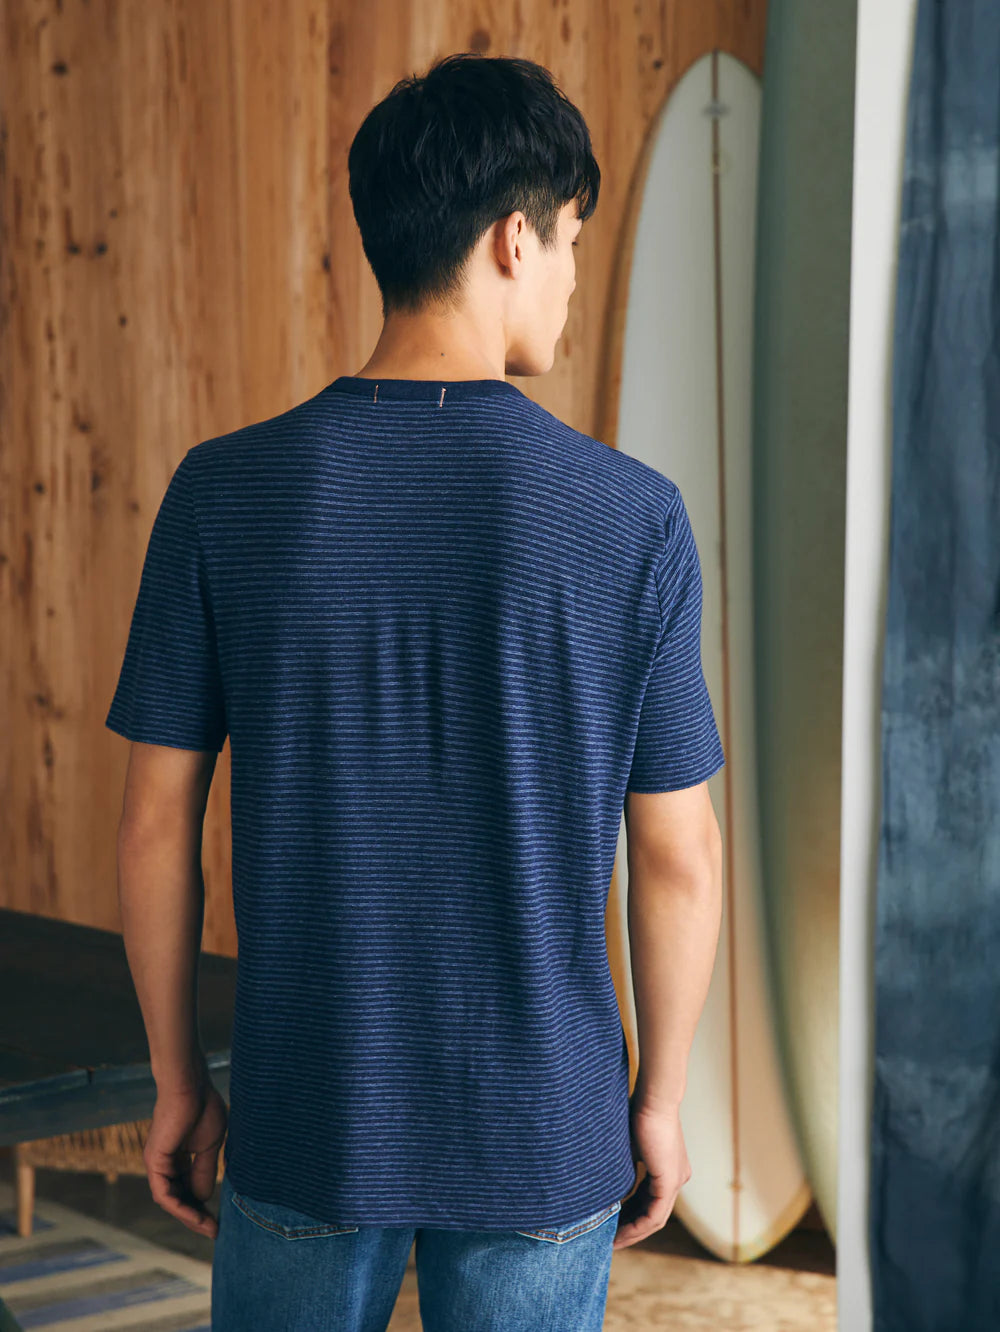 S/S VINTAGE CHAMBRAY TEE - NAVY COVE STRIPE